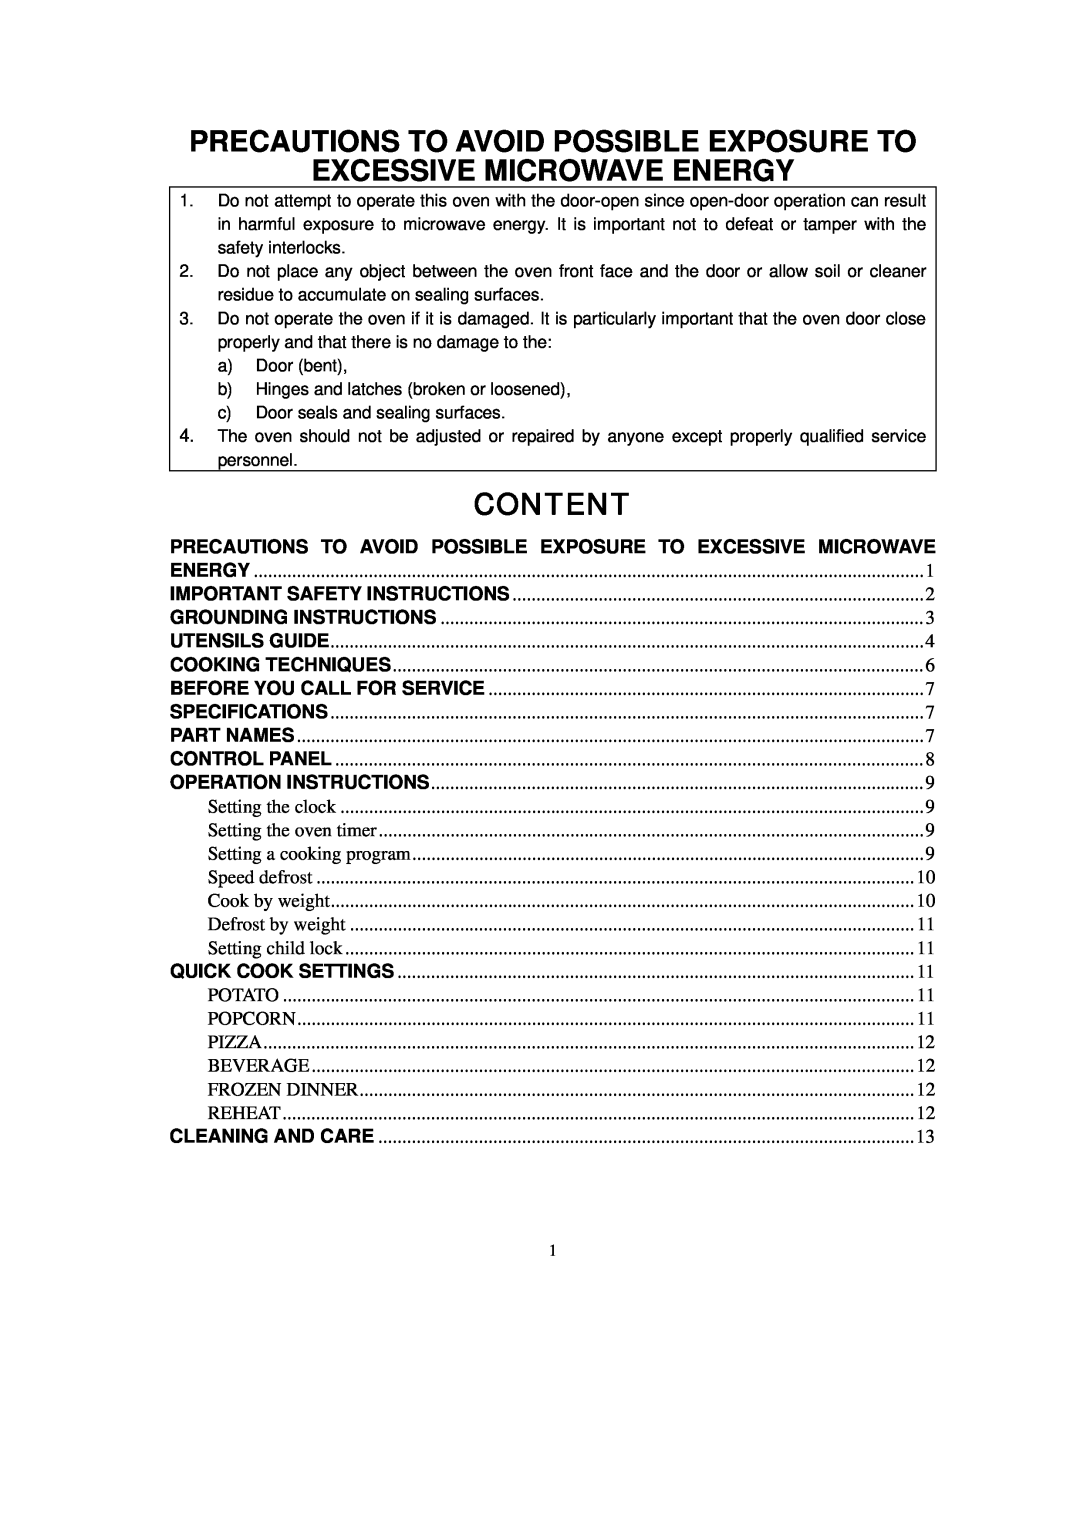 RCA RMW733BLACK owner manual Precautions To Avoid Possible Exposure To, Excessive Microwave Energy, Content 